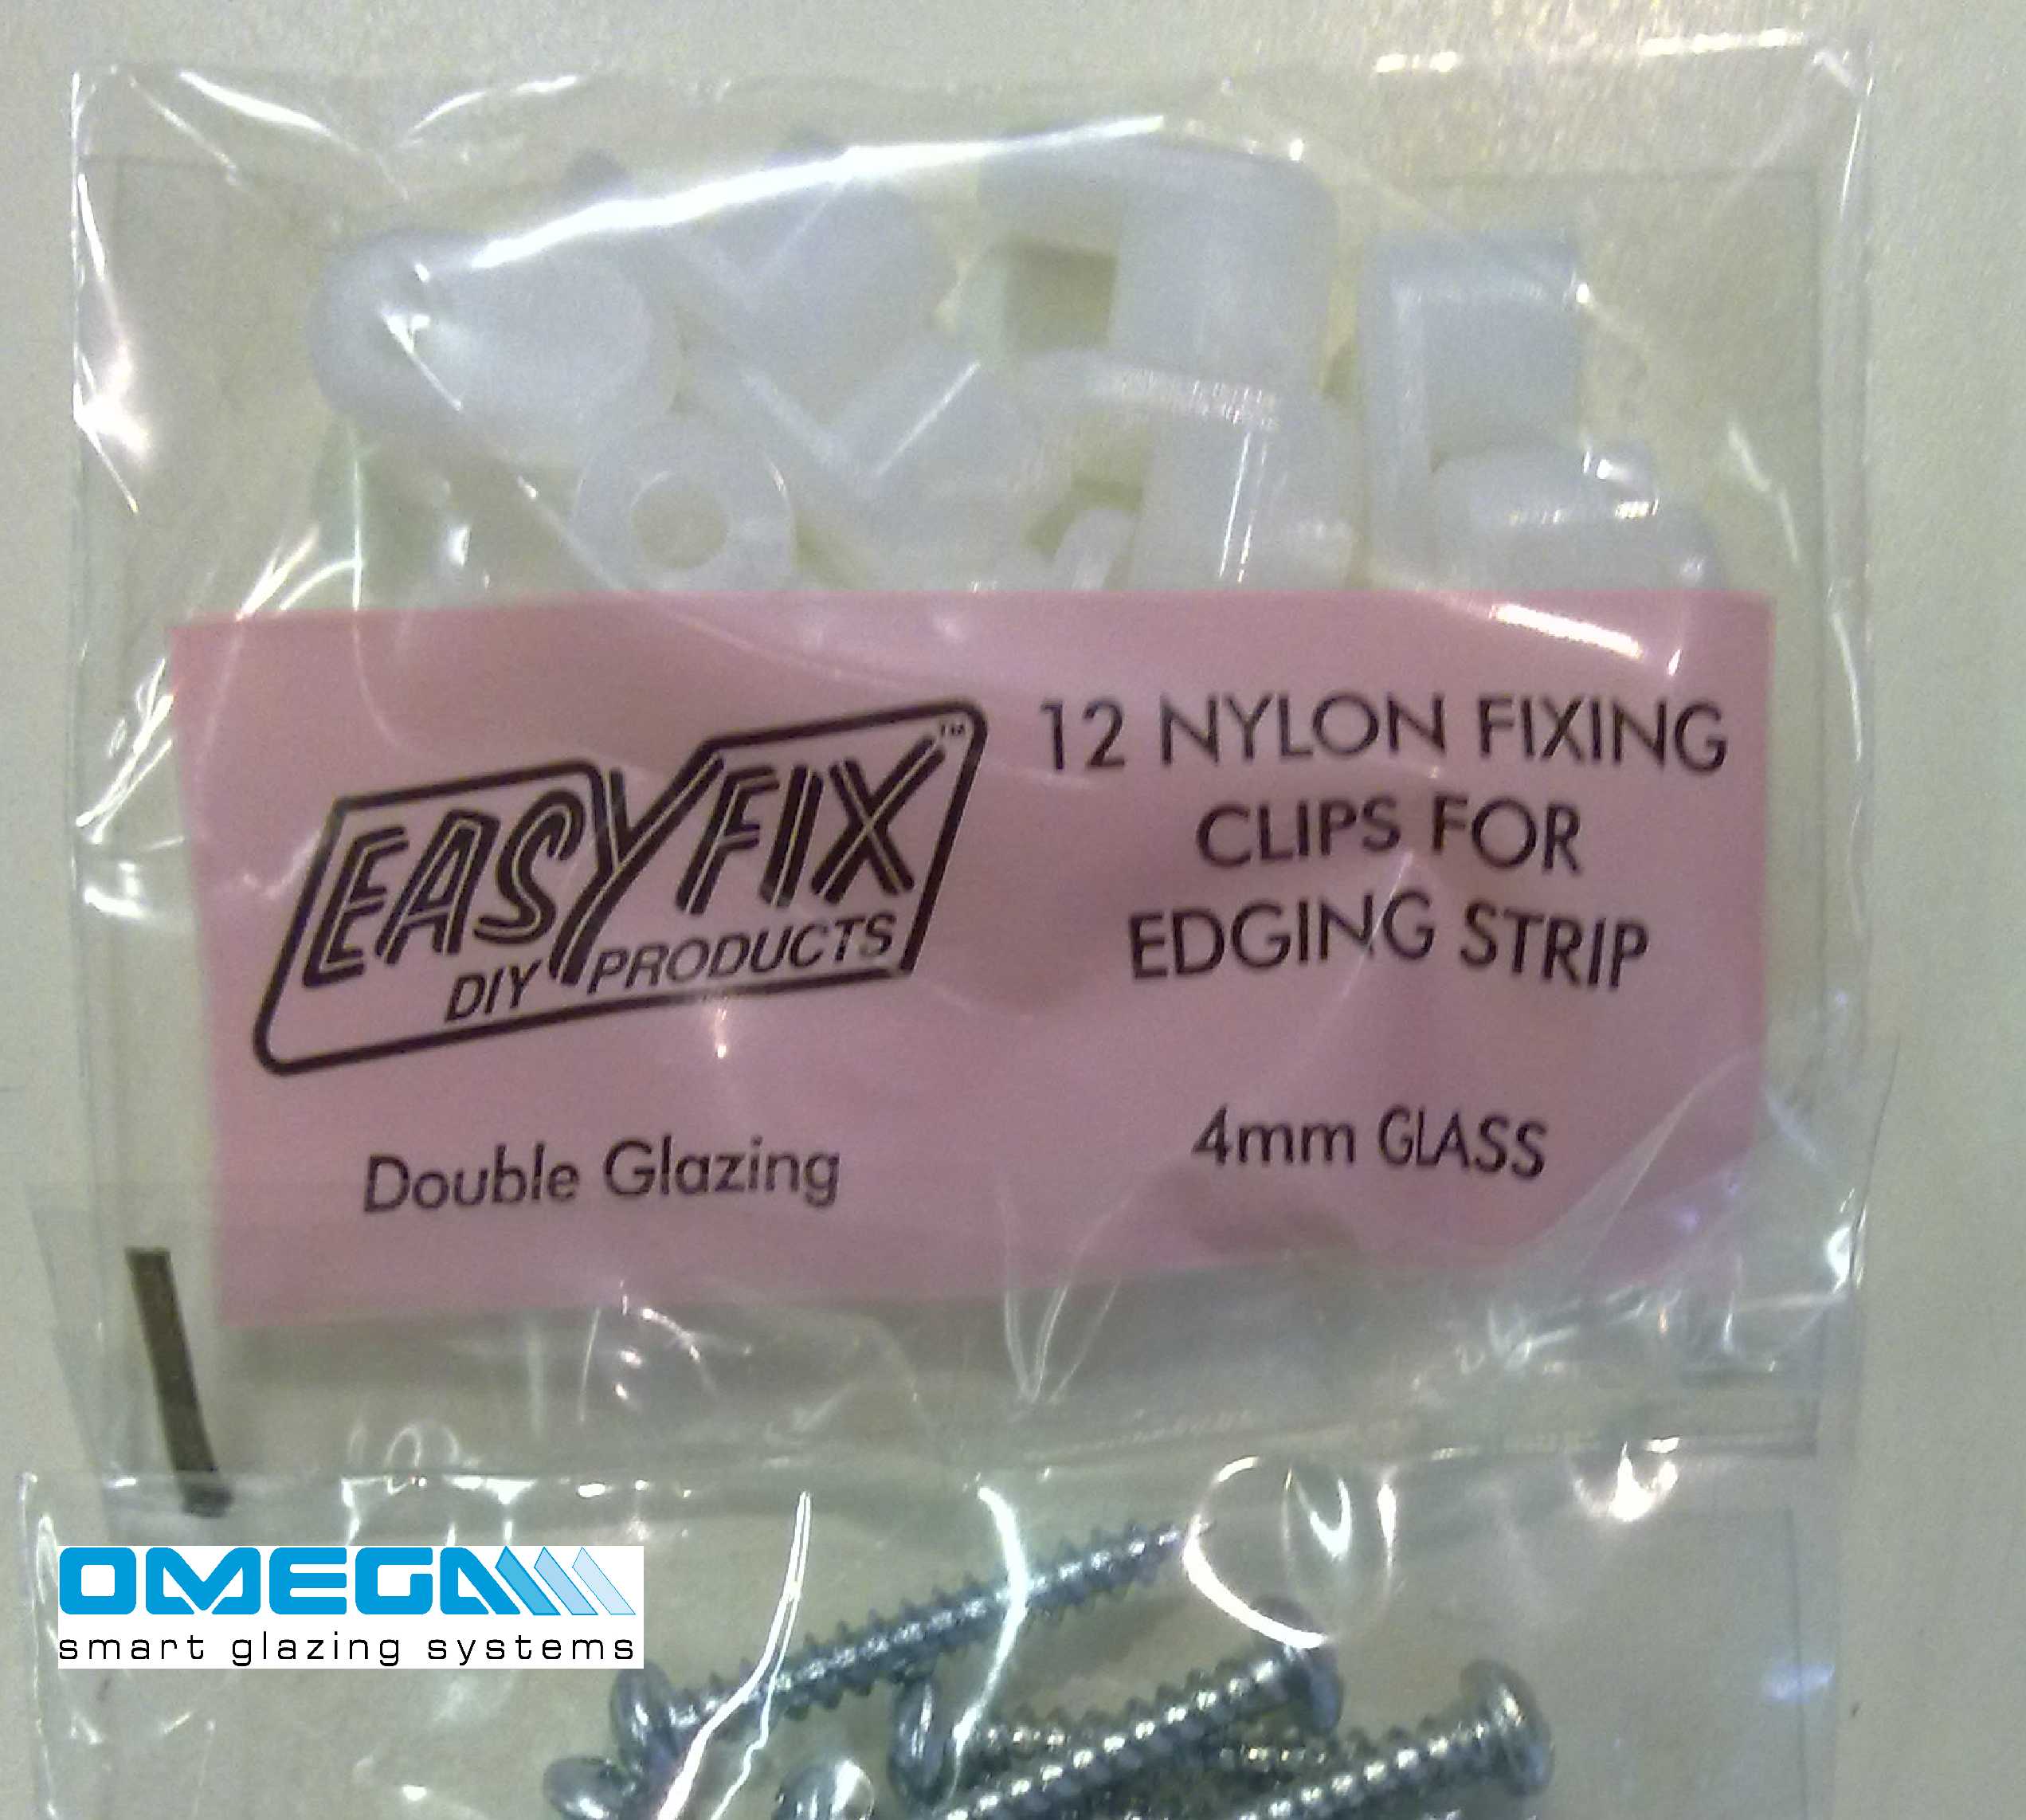 Buy Easyfix Nylon Clips - For 3mm Glazing Thickness, White online today